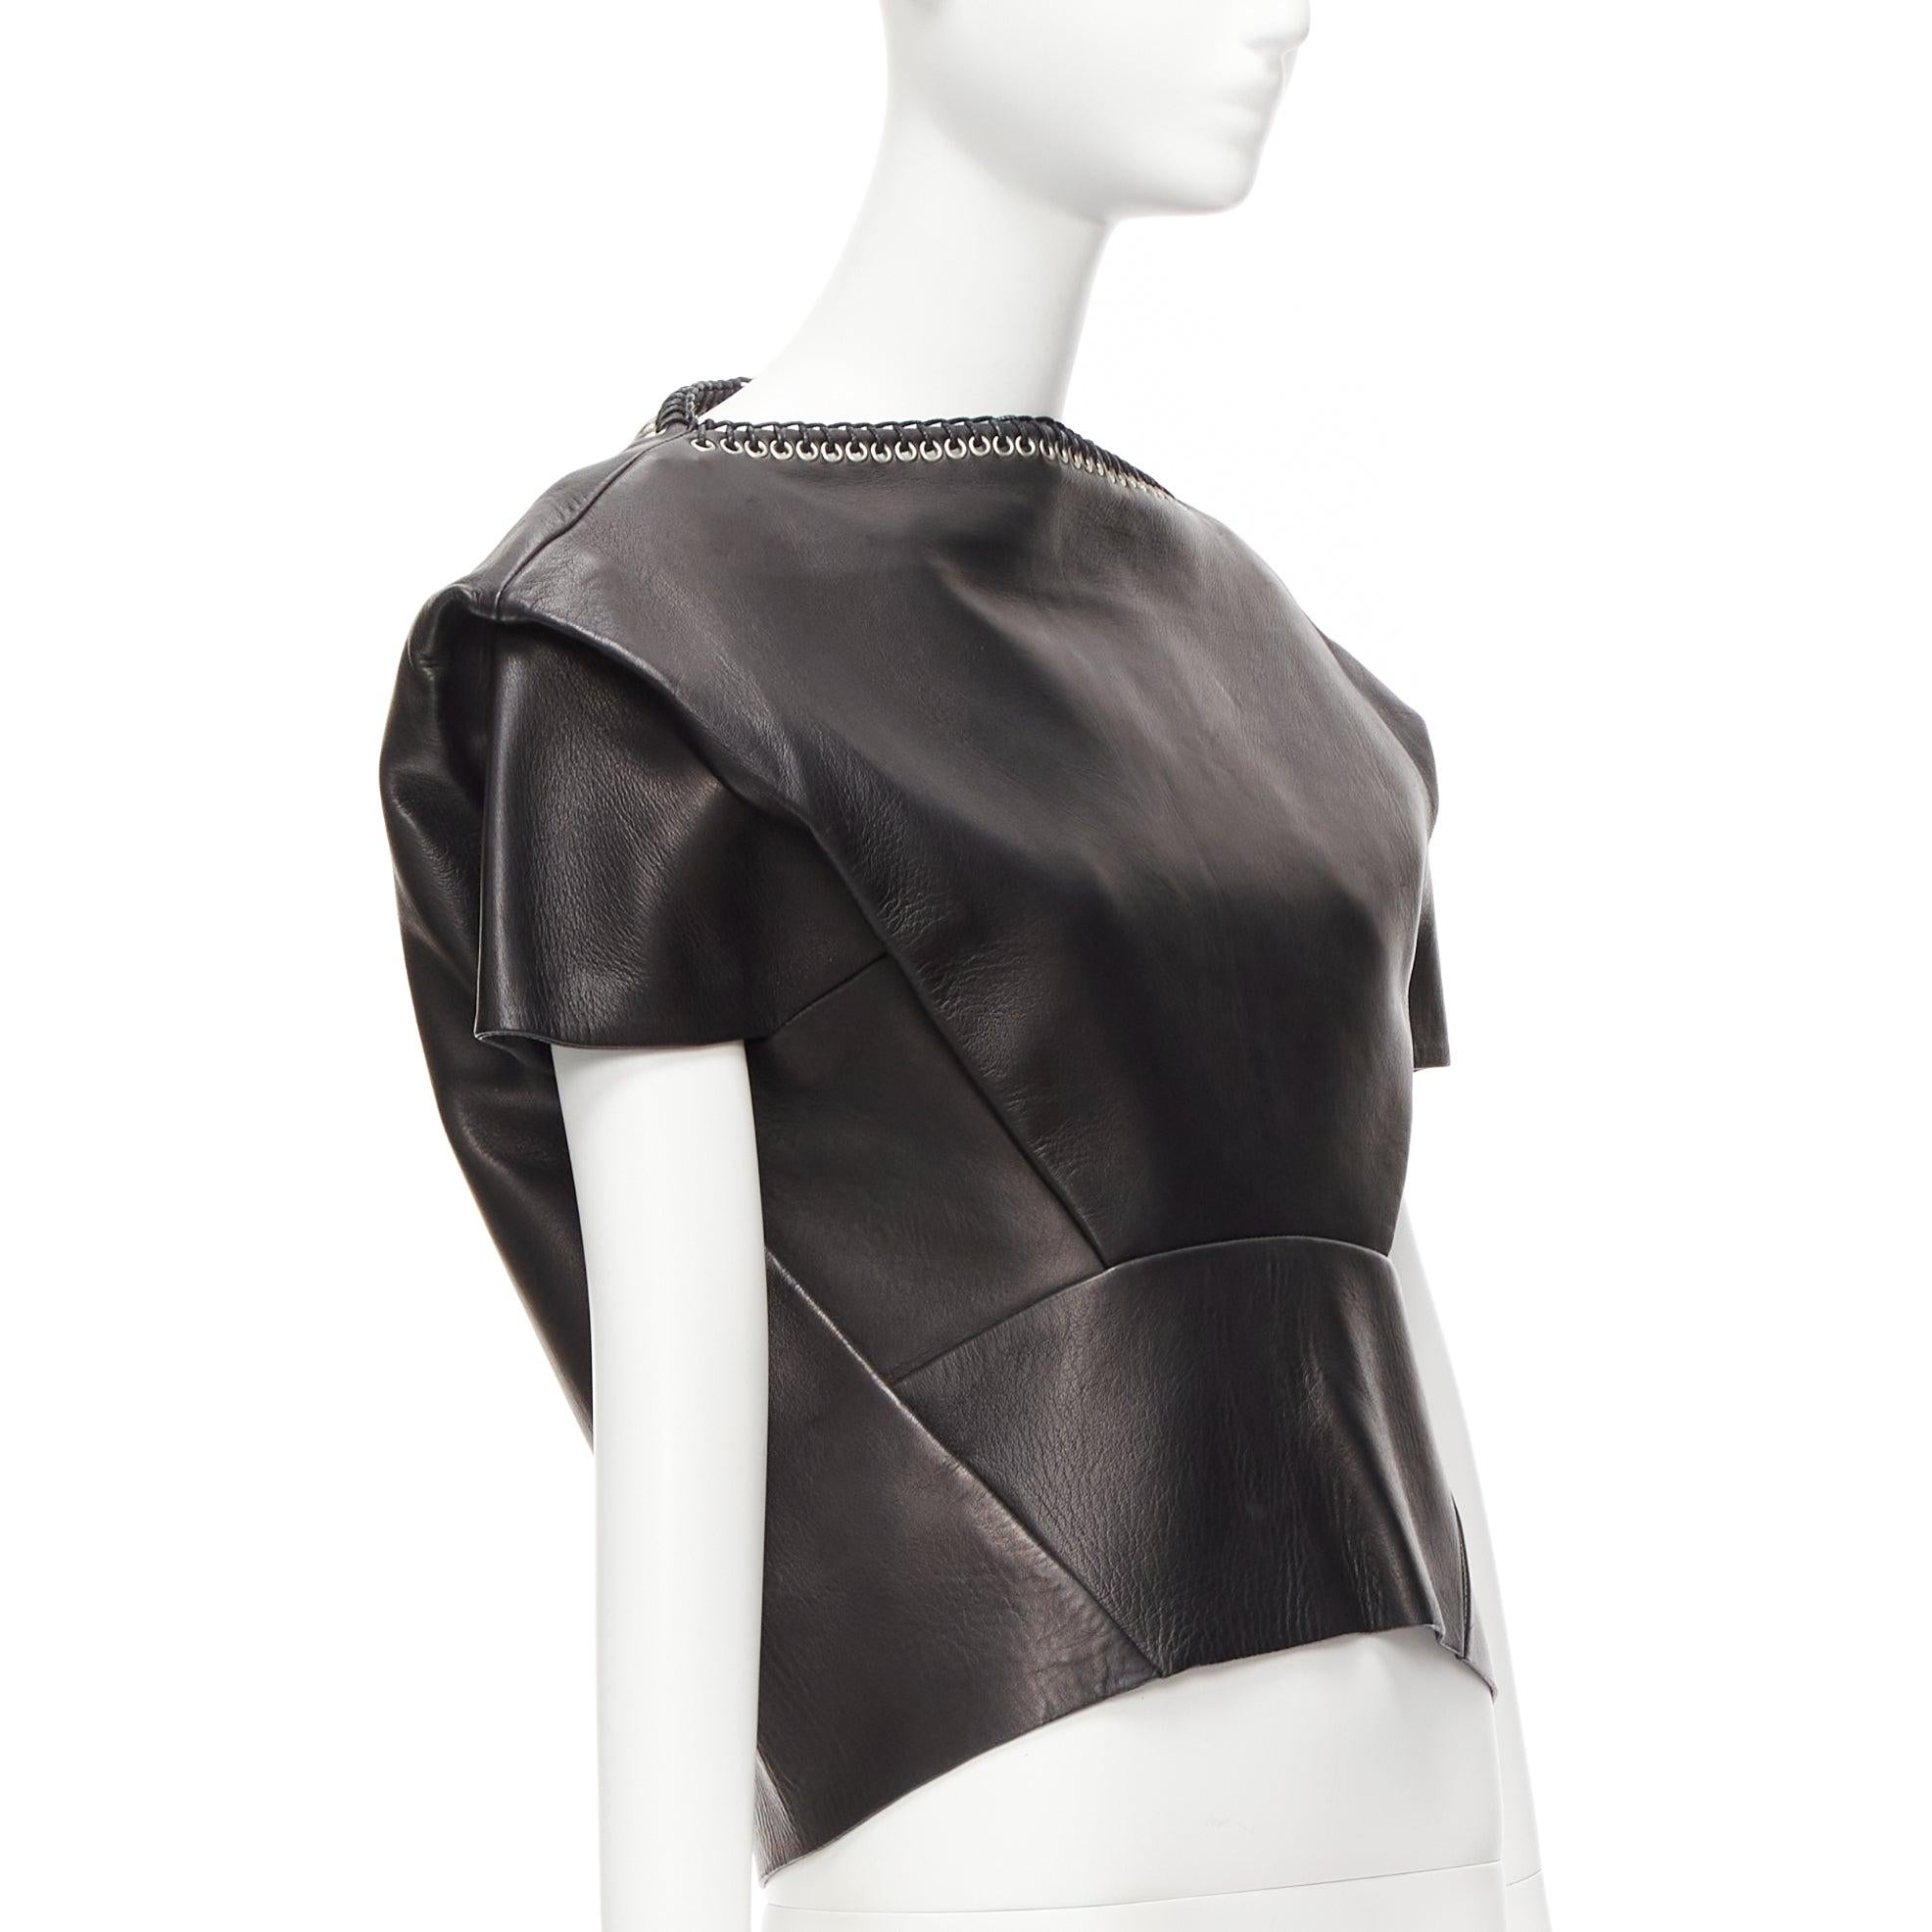 BALENCIAGA 2014 black lambskin leather grommet stud boxy cropped top FR36 S
Reference: SSLG/A00005
Brand: Balenciaga
Collection: 2014
Material: Lambskin Leather
Color: Black, Silver
Pattern: Solid
Closure: Zip
Lining: Black Leather
Extra Details: